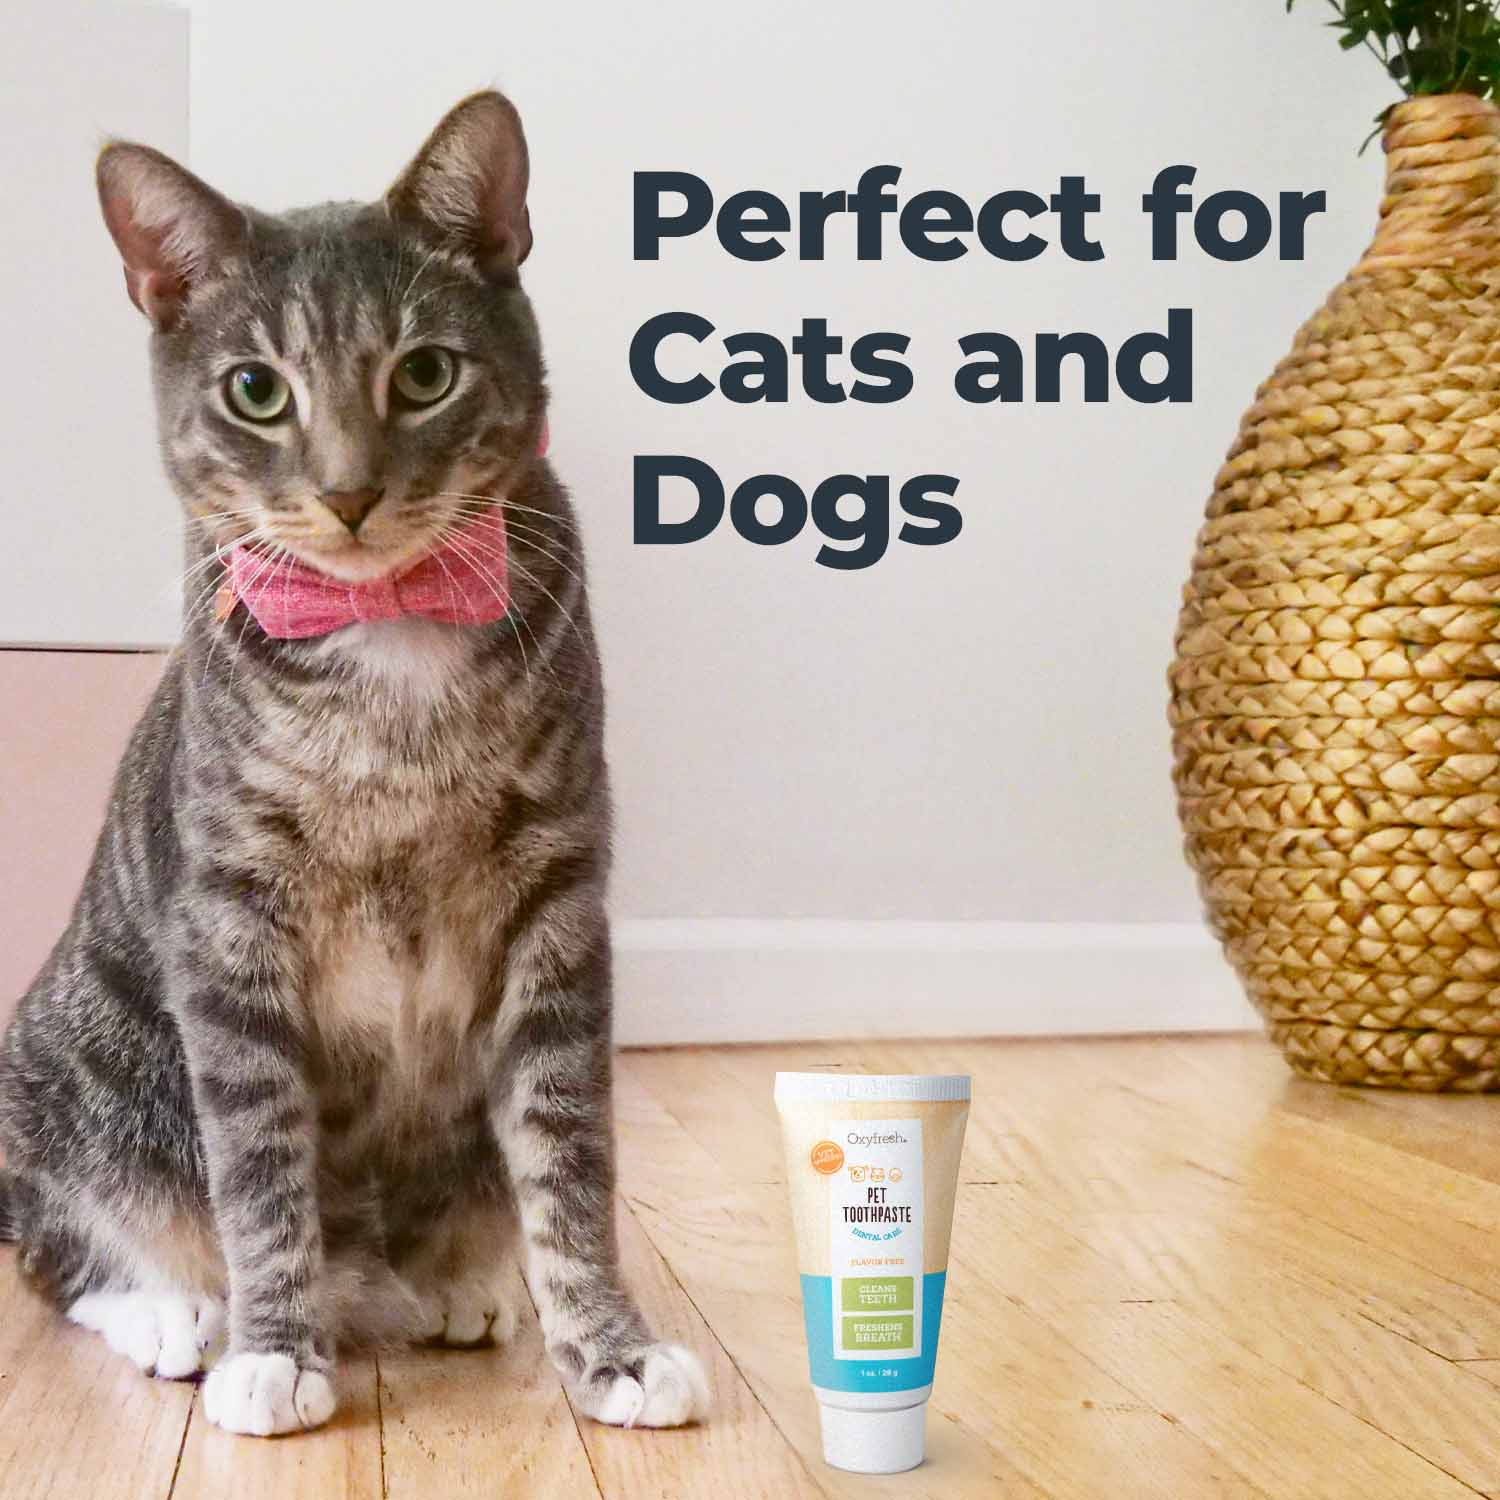 cat wearing a pink bowtie sitting next to a tube of pet toothpaste which is perfect for both cats and dogs